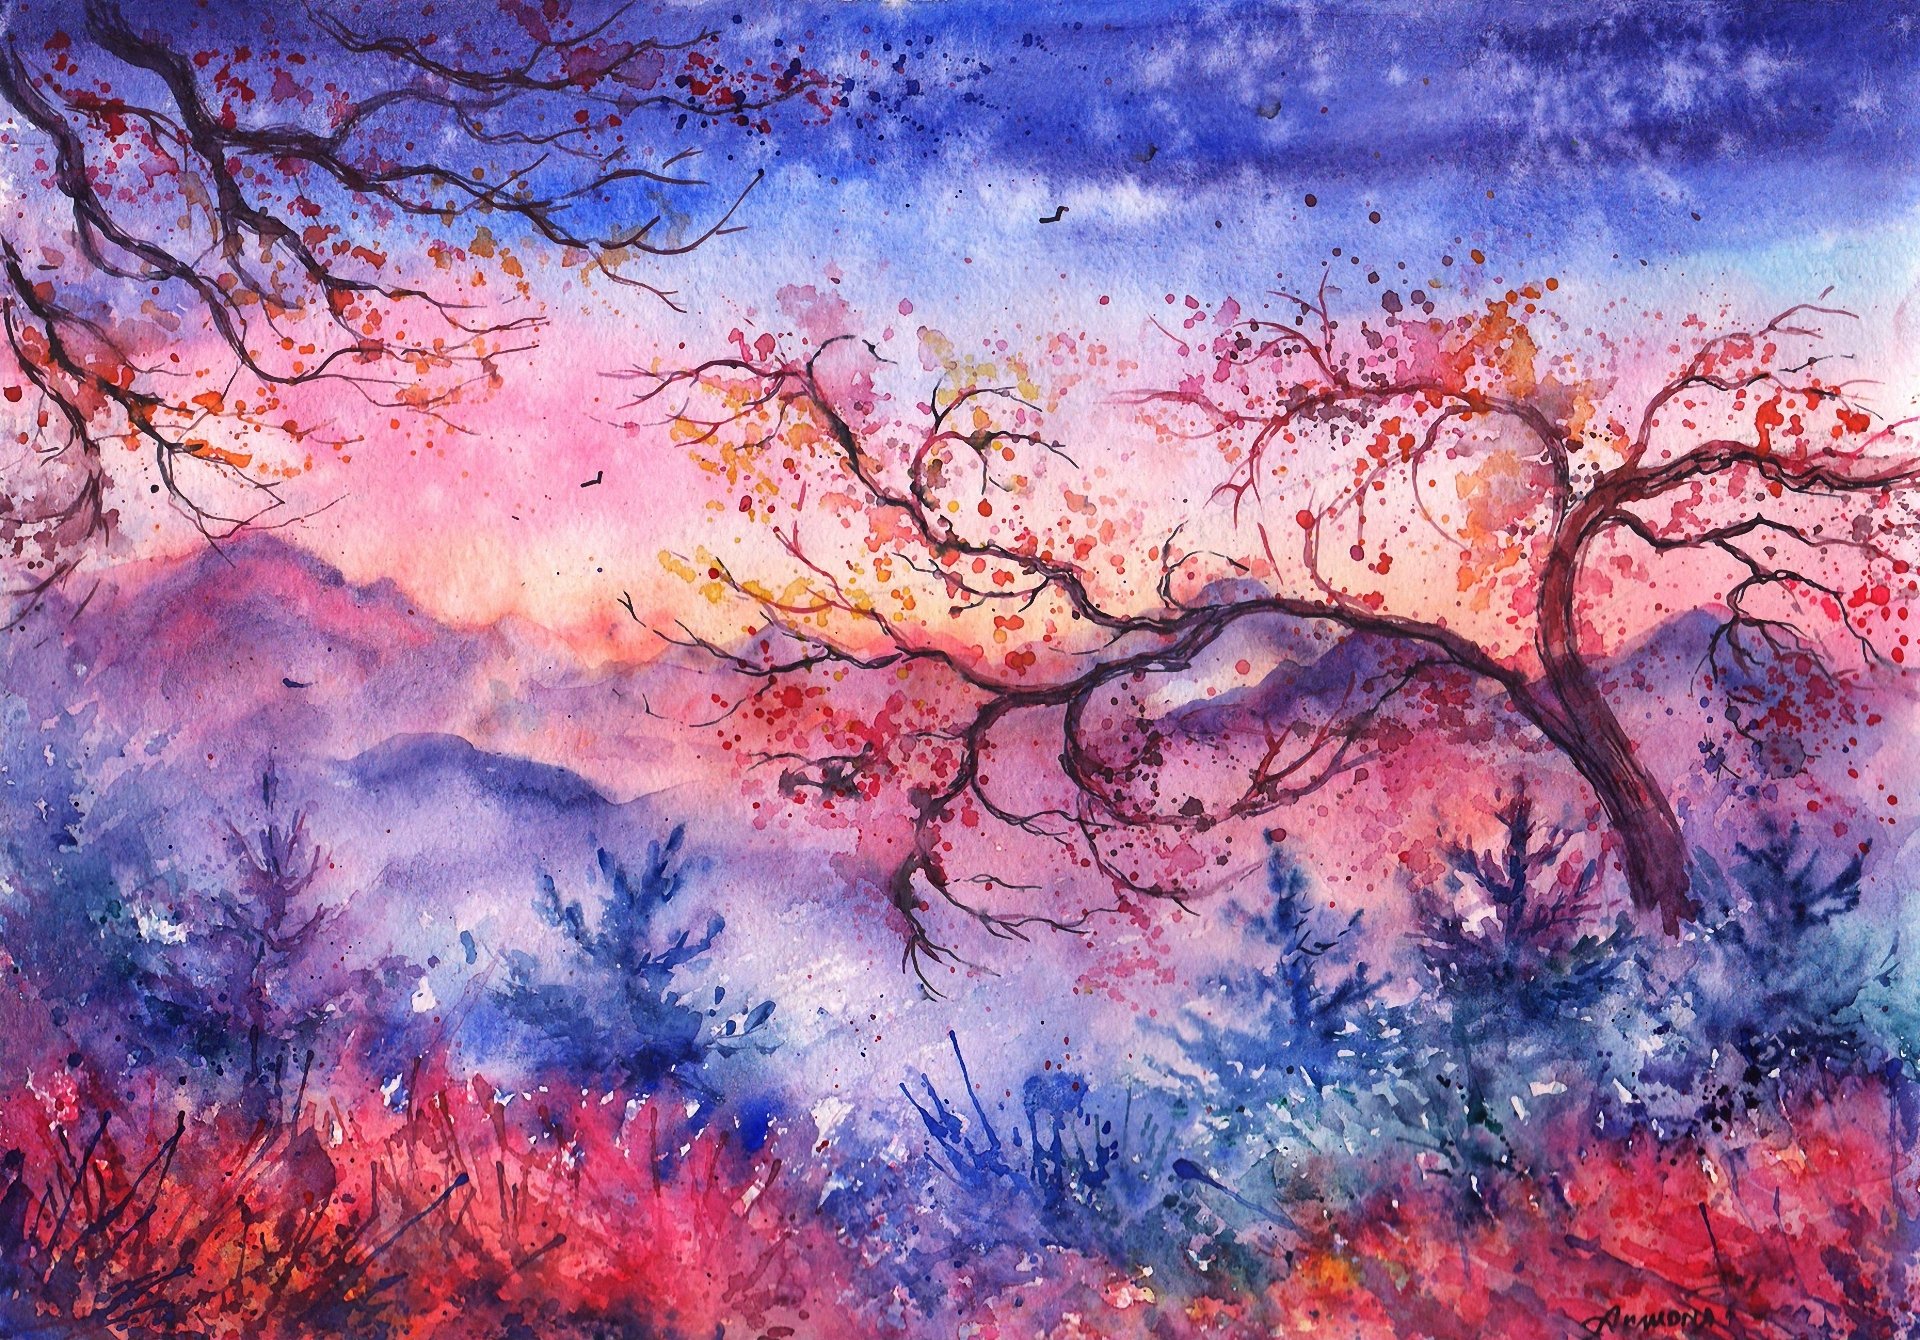 sunset, Mountains, Trees, Christmas, Trees, Birds, Foliage, Watercolor, Evening, Painted, Landscape Wallpaper